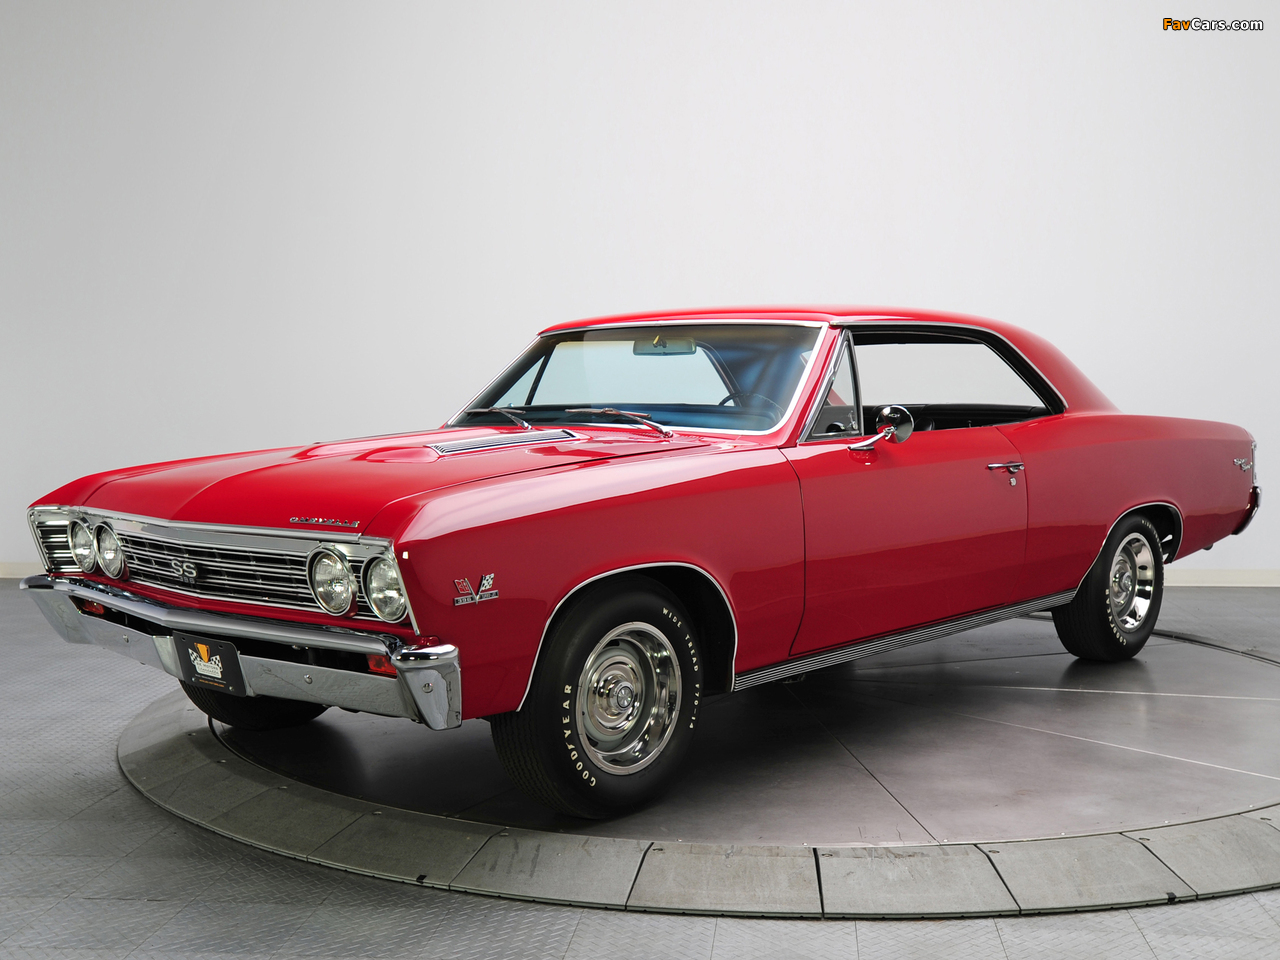 Images of Chevrolet Chevelle Malibu SS 396 L78 Hardtop Coupe 1967 (1280 x 960)